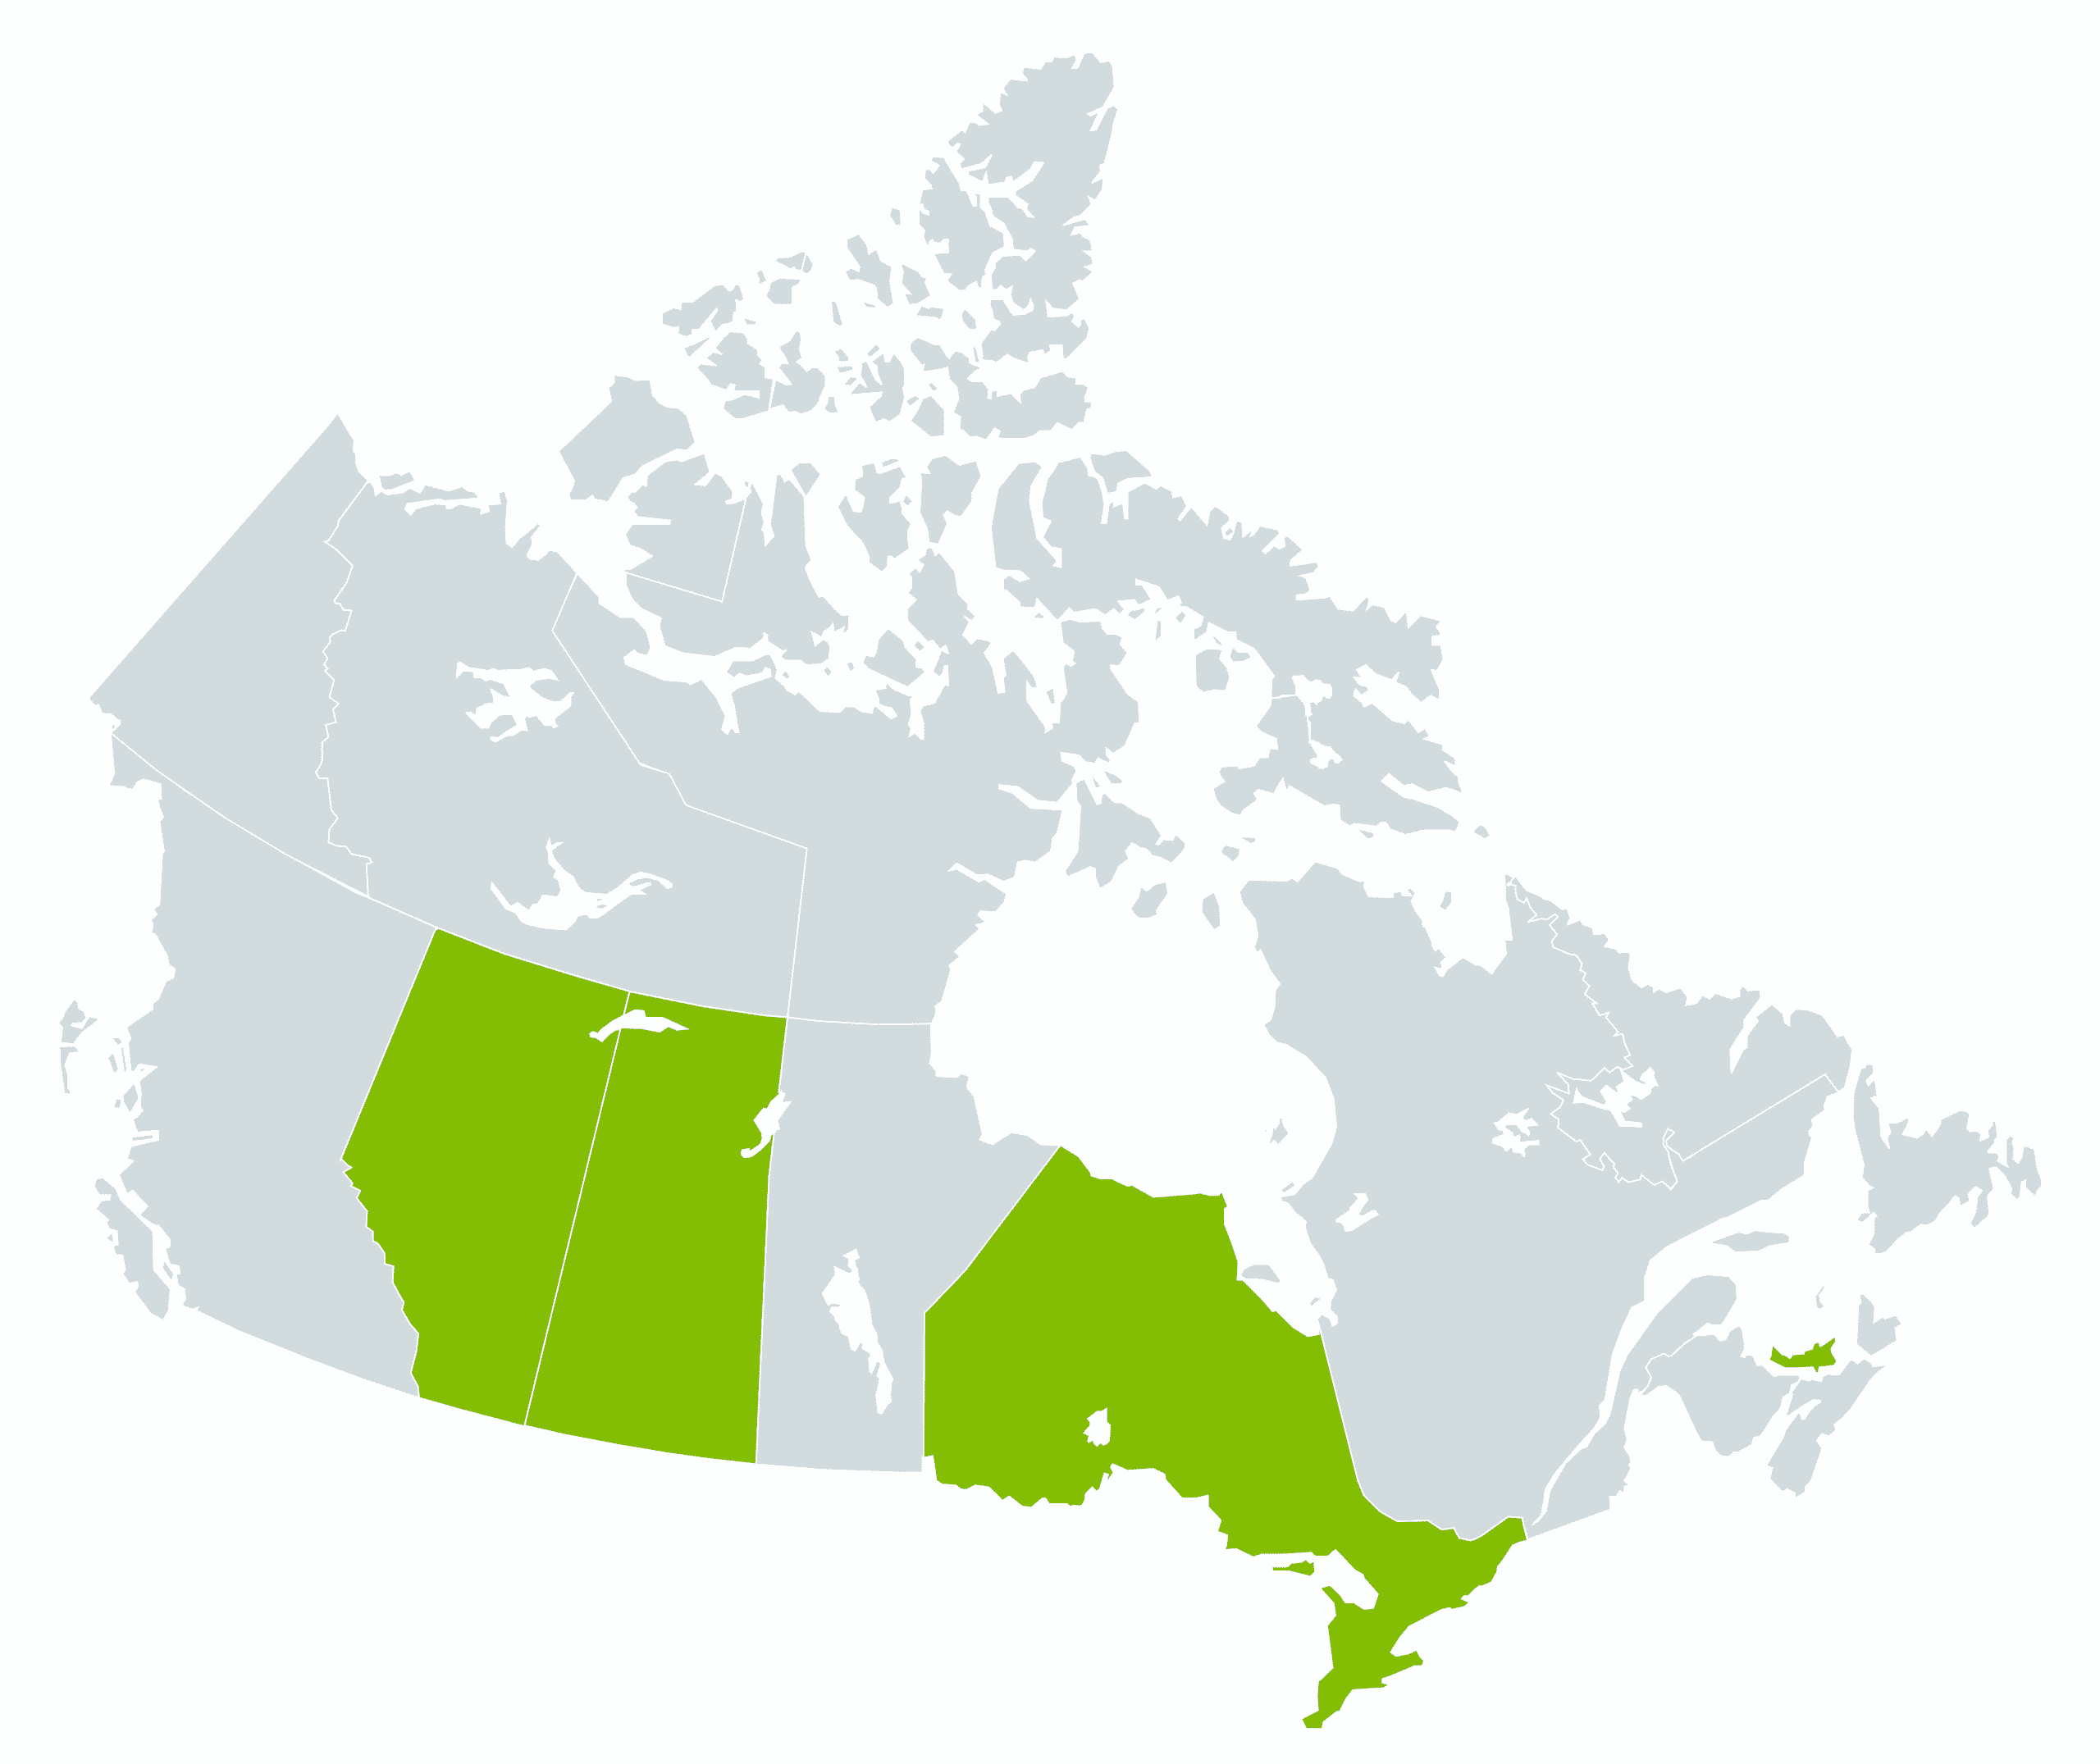 Map of Canada with Alberta, Saskatchewan, Ontario and PEI in green to show where our Kitchens are located.